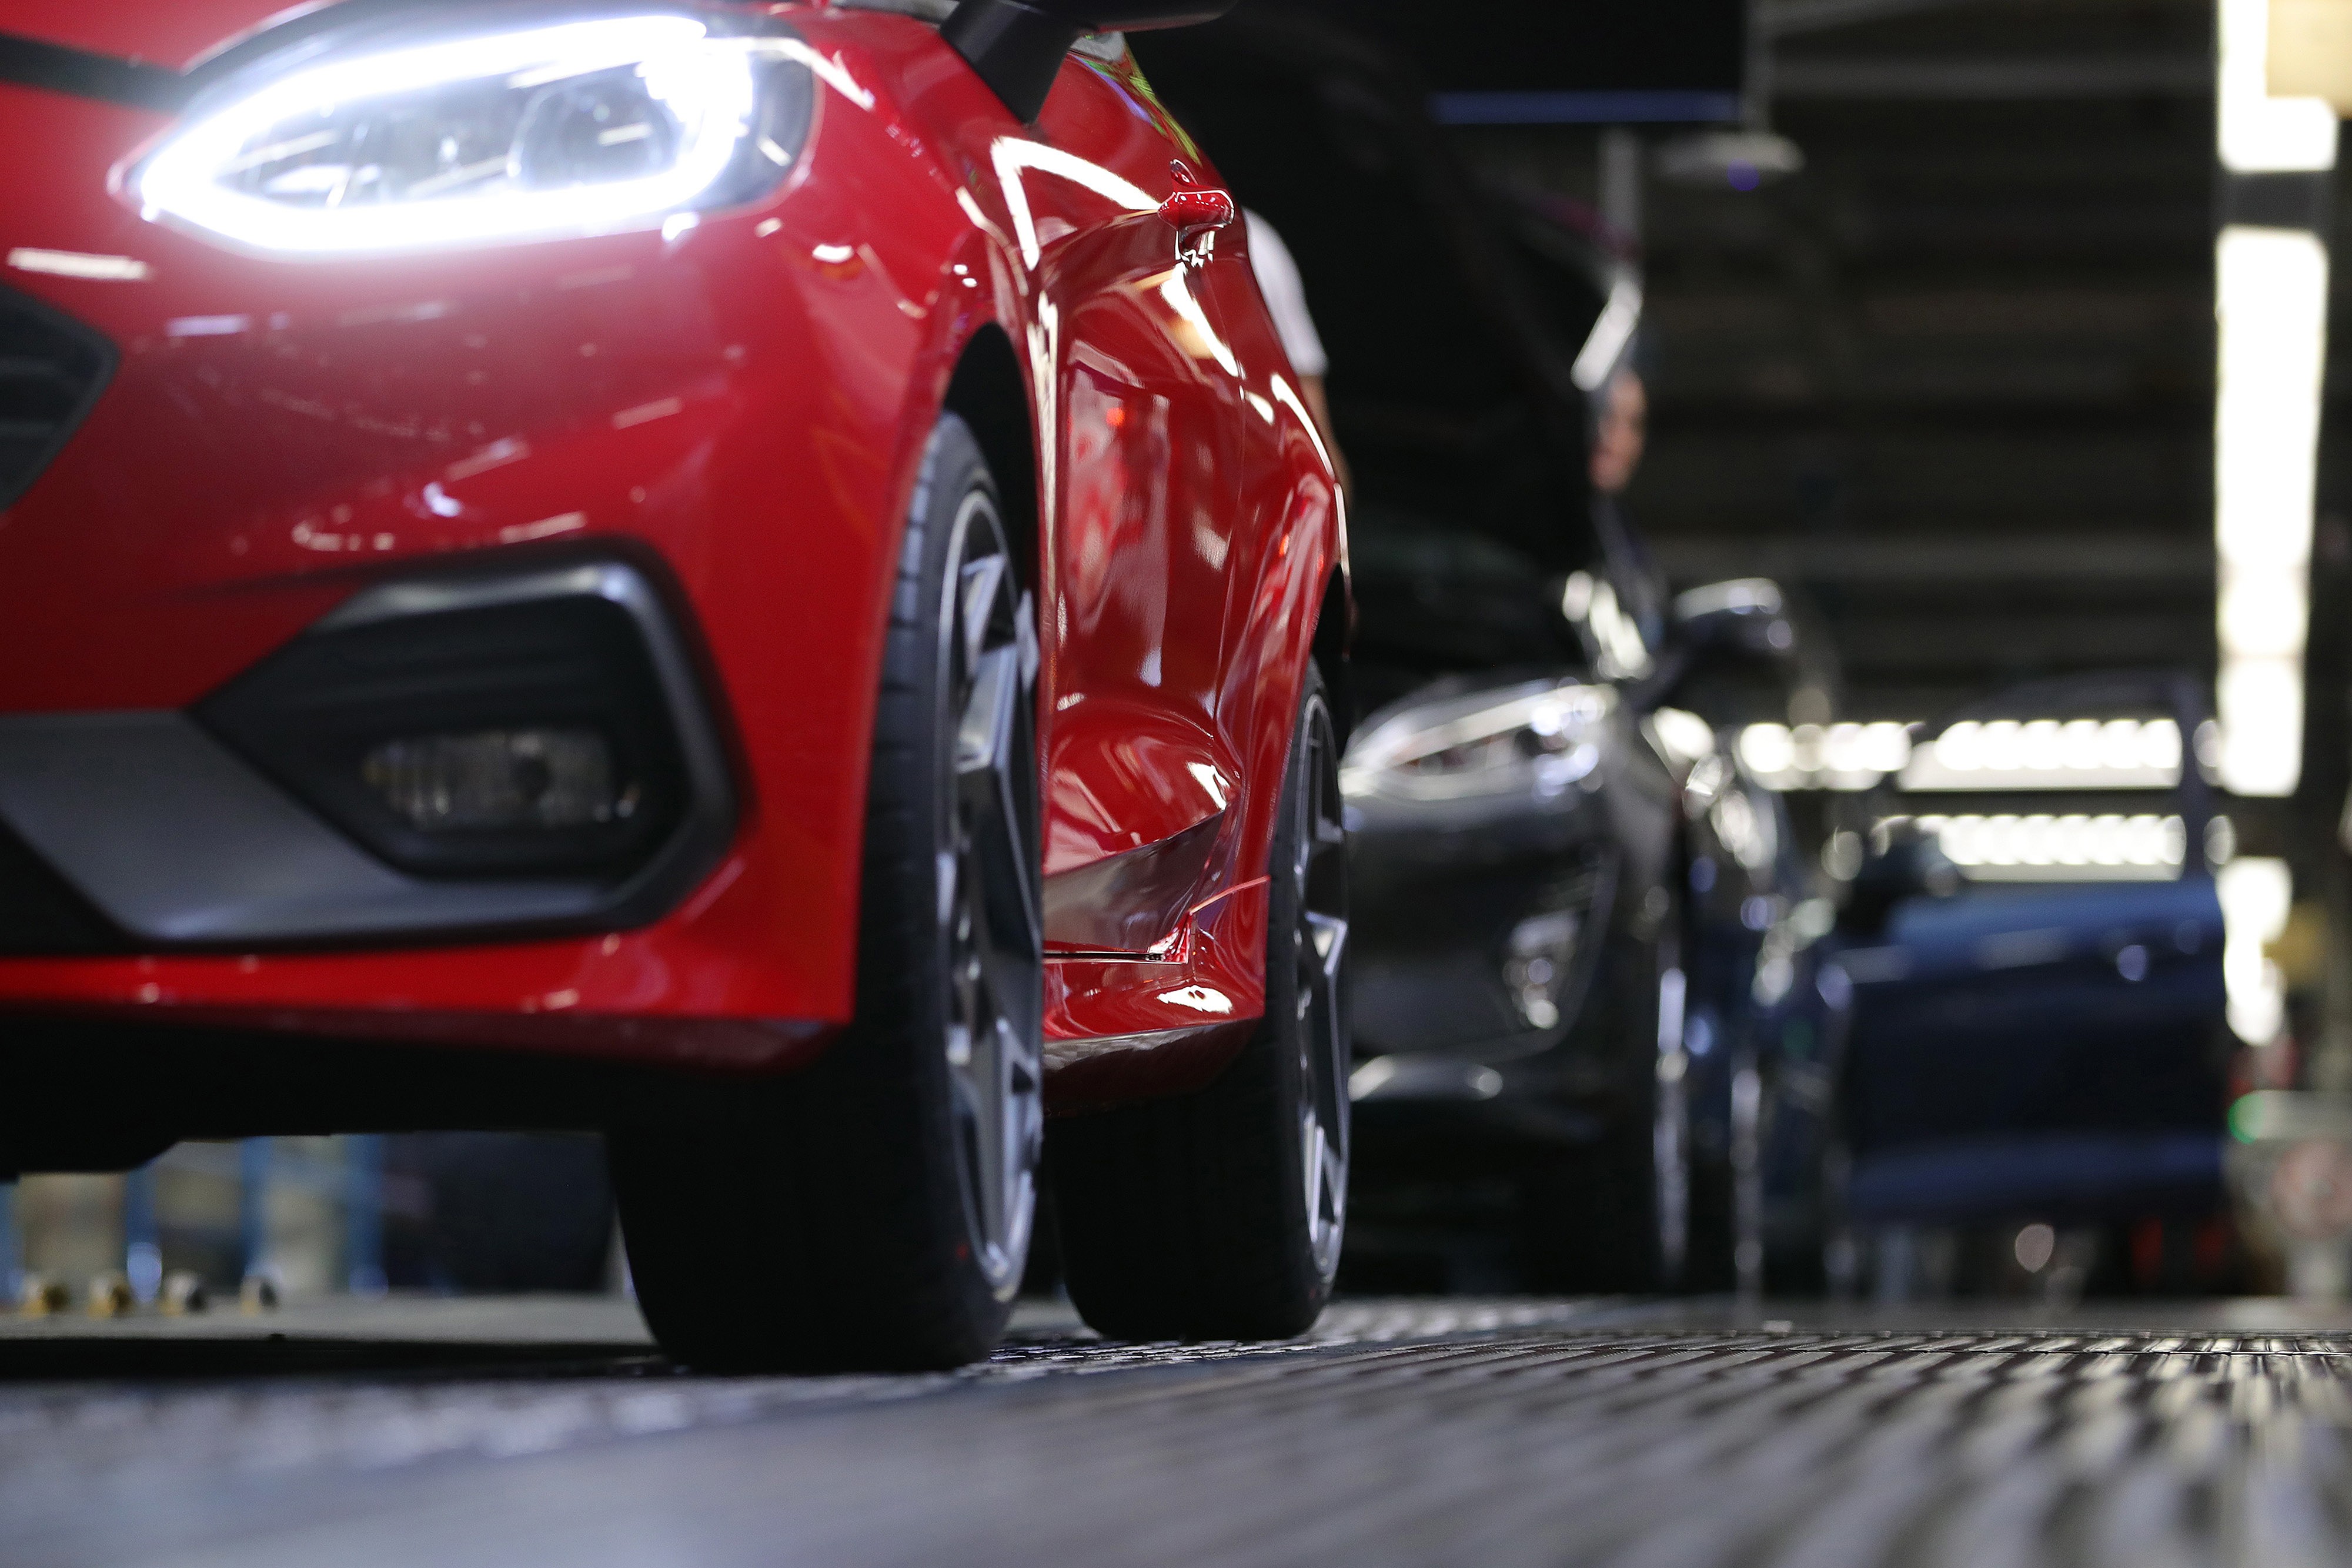 New Ford Fiesta cars roll off the assembly line at the Ford Motor Company factory in Cologne, Germany, on February 13. Photo: Bloomberg